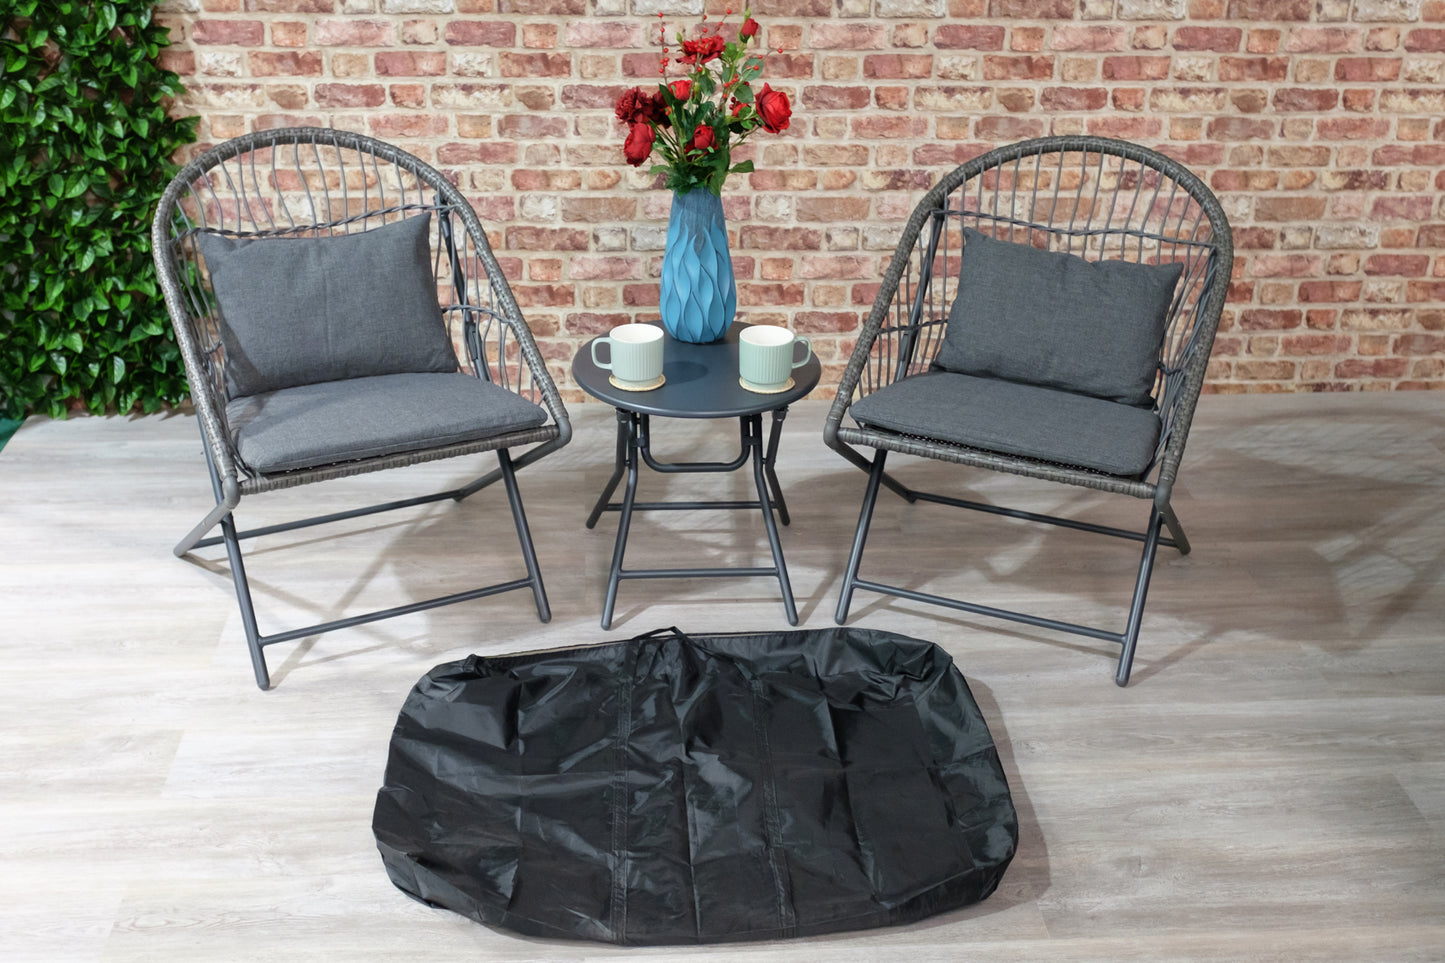 Holly Folding Bistro Set with bespoke carrybag - Folding chairs and folding table - Grey